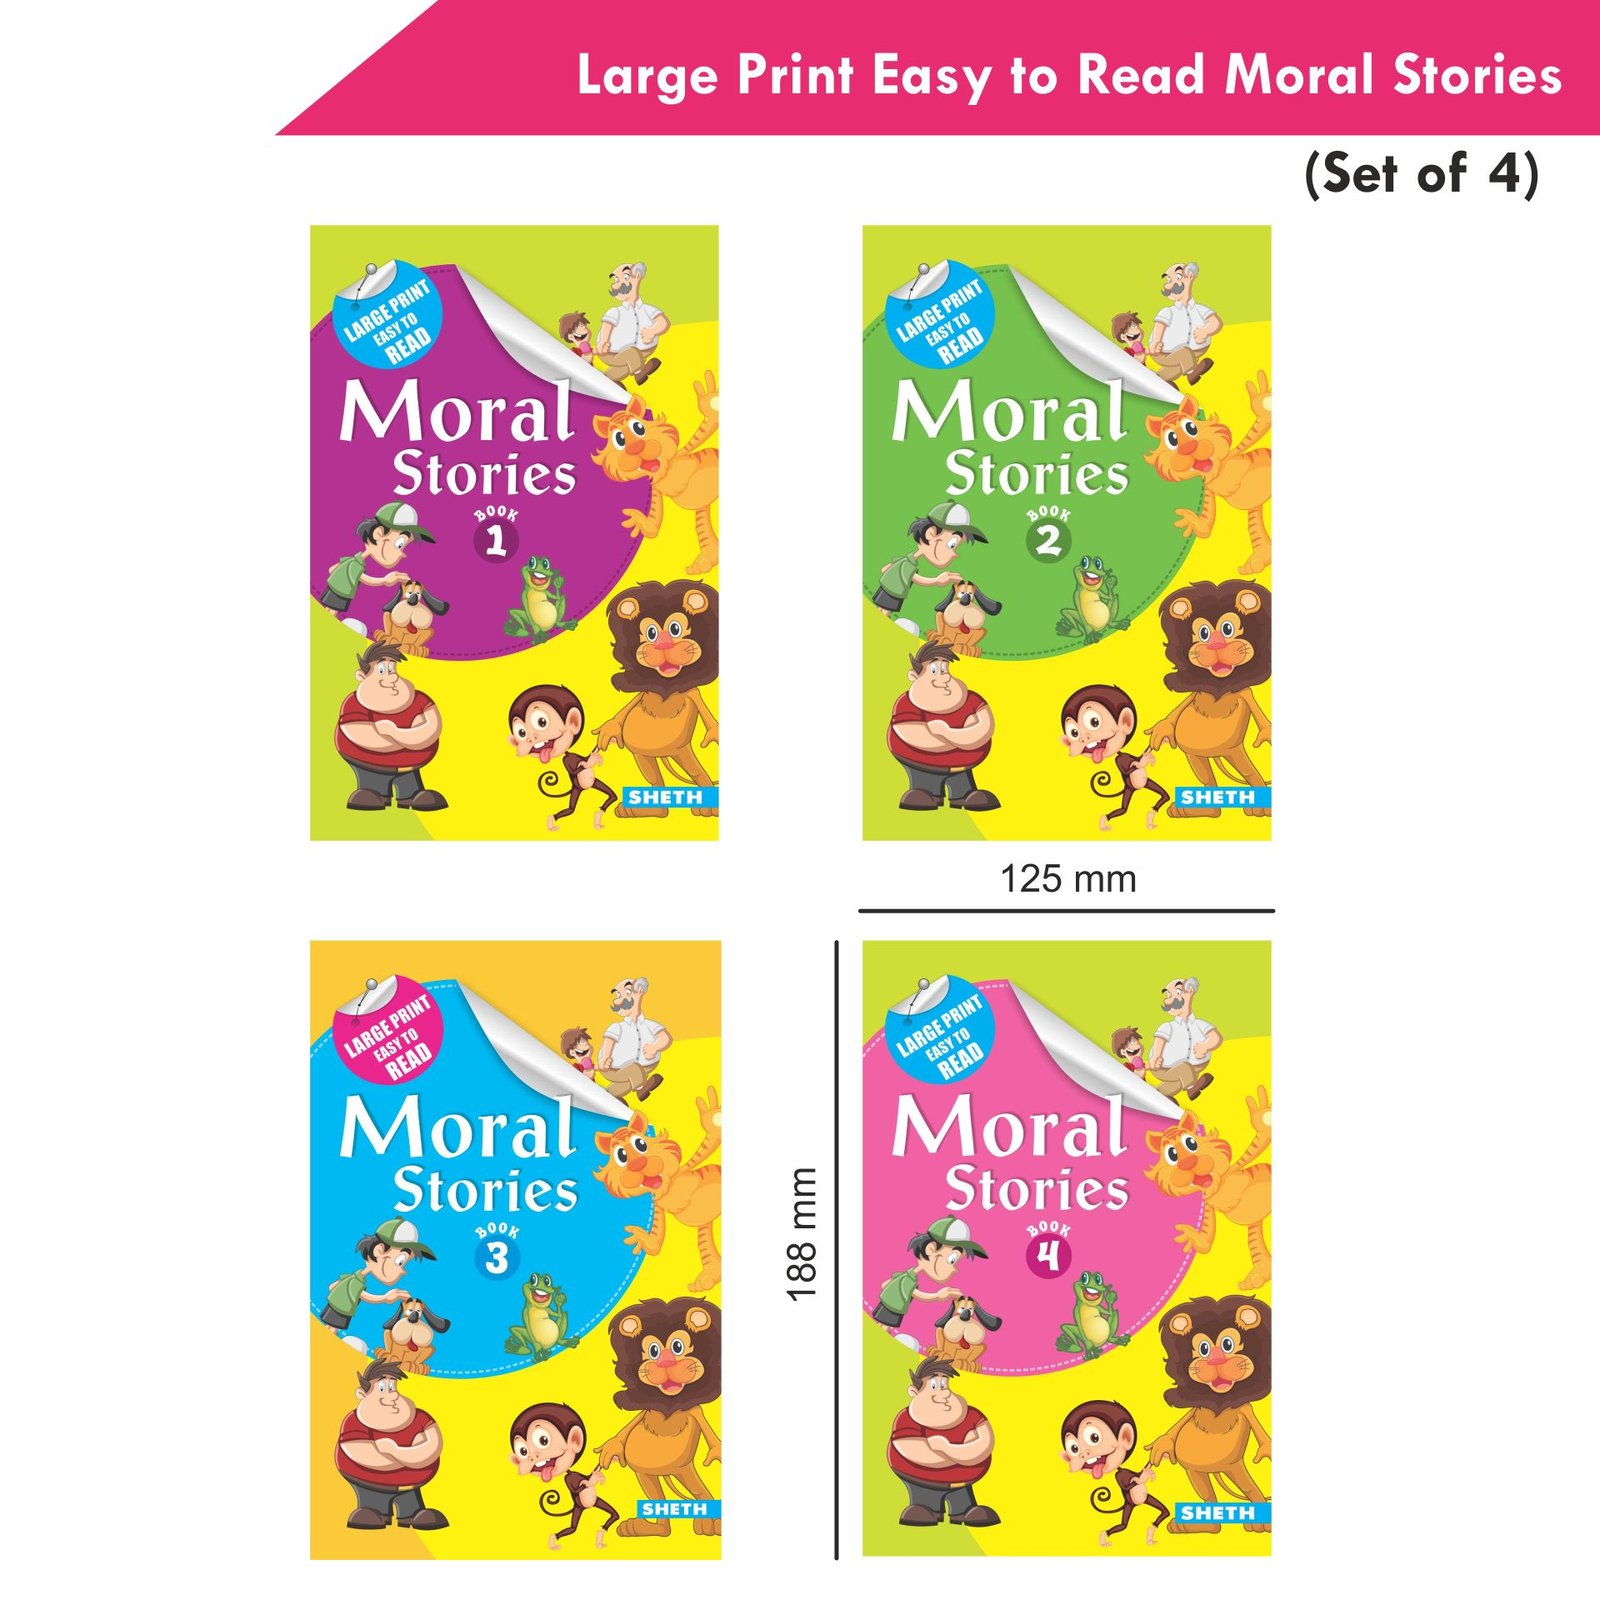 Large Print Easy to Read Moral Stories Set of 4 2